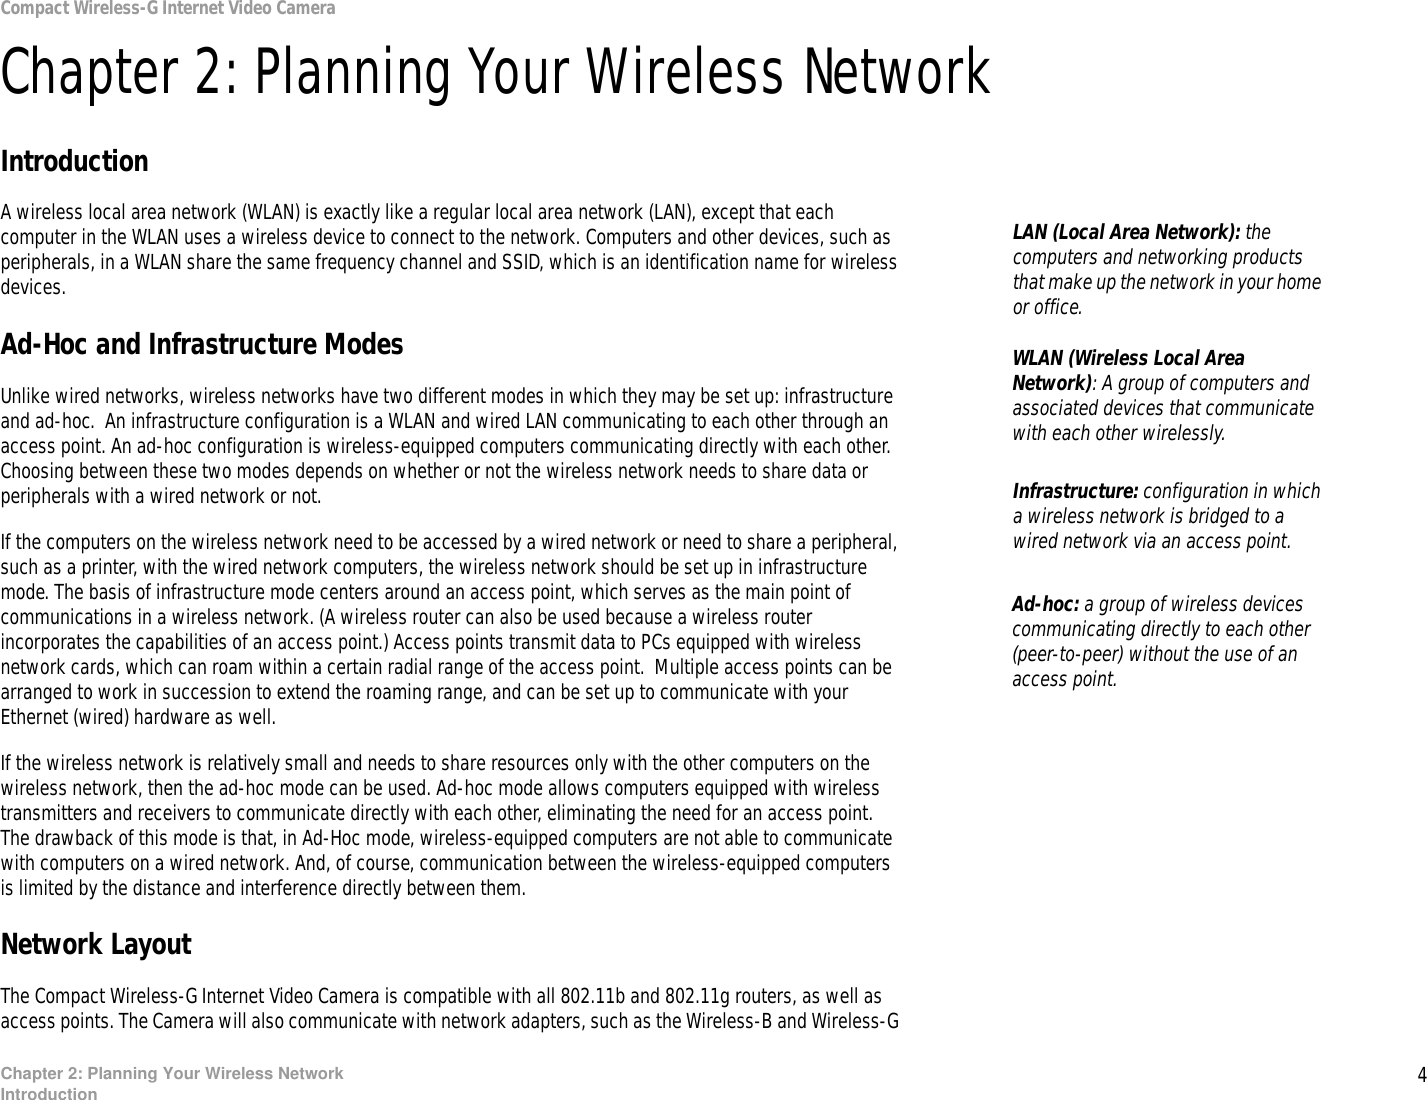 4Chapter 2: Planning Your Wireless NetworkIntroductionCompact Wireless-G Internet Video CameraChapter 2: Planning Your Wireless NetworkIntroductionA wireless local area network (WLAN) is exactly like a regular local area network (LAN), except that each computer in the WLAN uses a wireless device to connect to the network. Computers and other devices, such as peripherals, in a WLAN share the same frequency channel and SSID, which is an identification name for wireless devices.Ad-Hoc and Infrastructure ModesUnlike wired networks, wireless networks have two different modes in which they may be set up: infrastructure and ad-hoc.  An infrastructure configuration is a WLAN and wired LAN communicating to each other through an access point. An ad-hoc configuration is wireless-equipped computers communicating directly with each other. Choosing between these two modes depends on whether or not the wireless network needs to share data or peripherals with a wired network or not.If the computers on the wireless network need to be accessed by a wired network or need to share a peripheral, such as a printer, with the wired network computers, the wireless network should be set up in infrastructure mode. The basis of infrastructure mode centers around an access point, which serves as the main point of communications in a wireless network. (A wireless router can also be used because a wireless router incorporates the capabilities of an access point.) Access points transmit data to PCs equipped with wireless network cards, which can roam within a certain radial range of the access point.  Multiple access points can be arranged to work in succession to extend the roaming range, and can be set up to communicate with your Ethernet (wired) hardware as well.If the wireless network is relatively small and needs to share resources only with the other computers on the wireless network, then the ad-hoc mode can be used. Ad-hoc mode allows computers equipped with wireless transmitters and receivers to communicate directly with each other, eliminating the need for an access point.  The drawback of this mode is that, in Ad-Hoc mode, wireless-equipped computers are not able to communicate with computers on a wired network. And, of course, communication between the wireless-equipped computers is limited by the distance and interference directly between them.Network LayoutThe Compact Wireless-G Internet Video Camera is compatible with all 802.11b and 802.11g routers, as well as access points. The Camera will also communicate with network adapters, such as the Wireless-B and Wireless-G Infrastructure: configuration in which a wireless network is bridged to a wired network via an access point.LAN (Local Area Network): the computers and networking products that make up the network in your home or office.Ad-hoc: a group of wireless devices  communicating directly to each other (peer-to-peer) without the use of an access point.WLAN (Wireless Local Area Network): A group of computers and associated devices that communicate with each other wirelessly. 